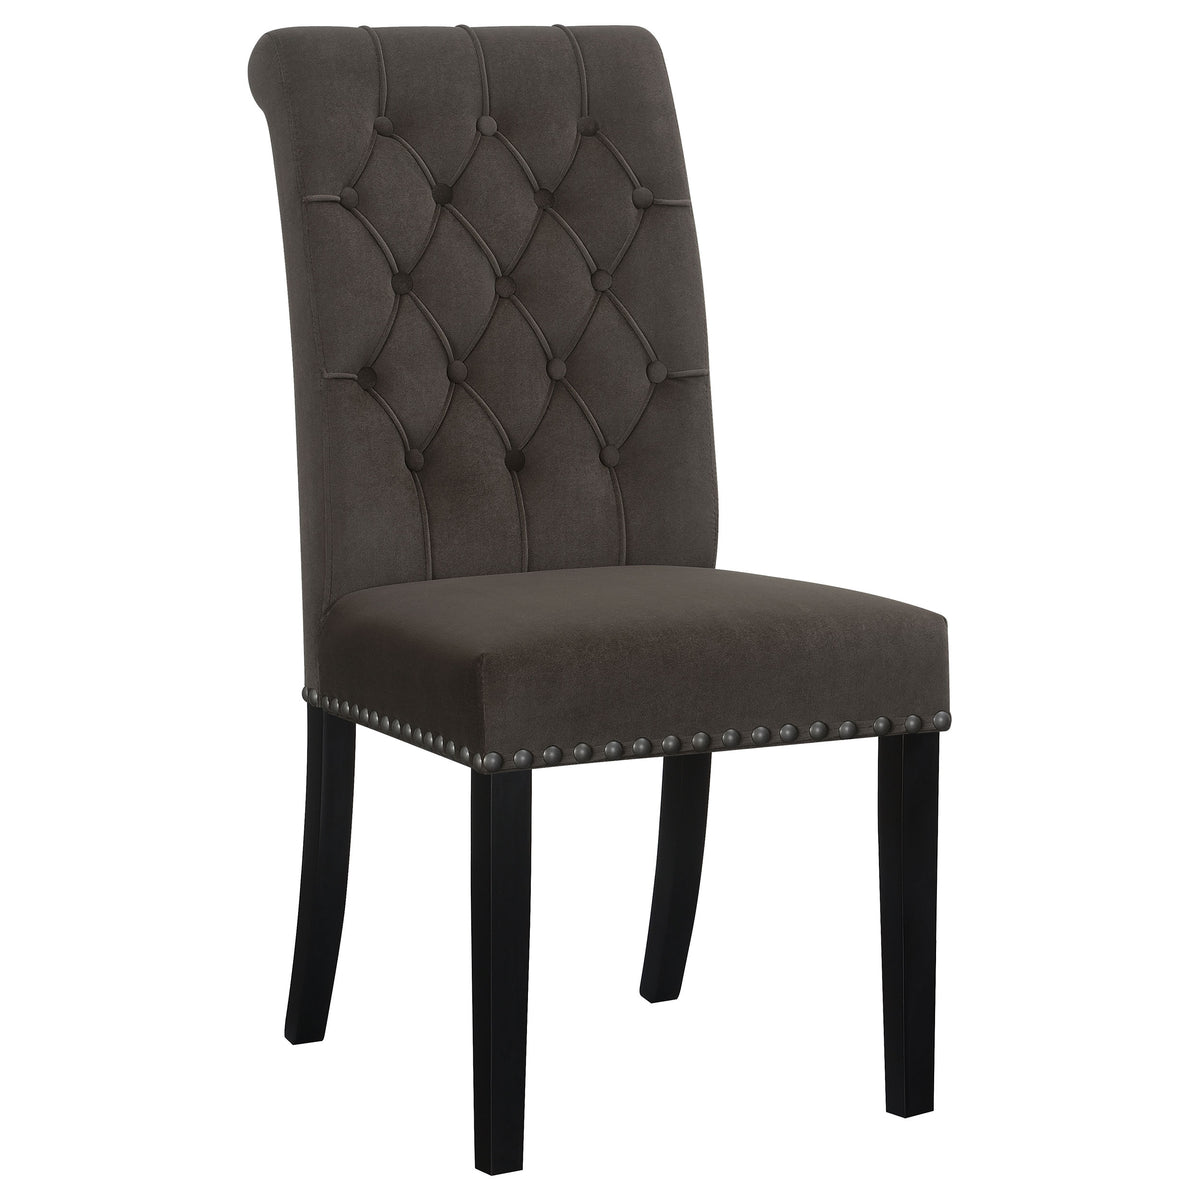 Alana Upholstered Tufted Side Chairs with Nailhead Trim (Set of 2) Alana Upholstered Tufted Side Chairs with Nailhead Trim (Set of 2) Half Price Furniture